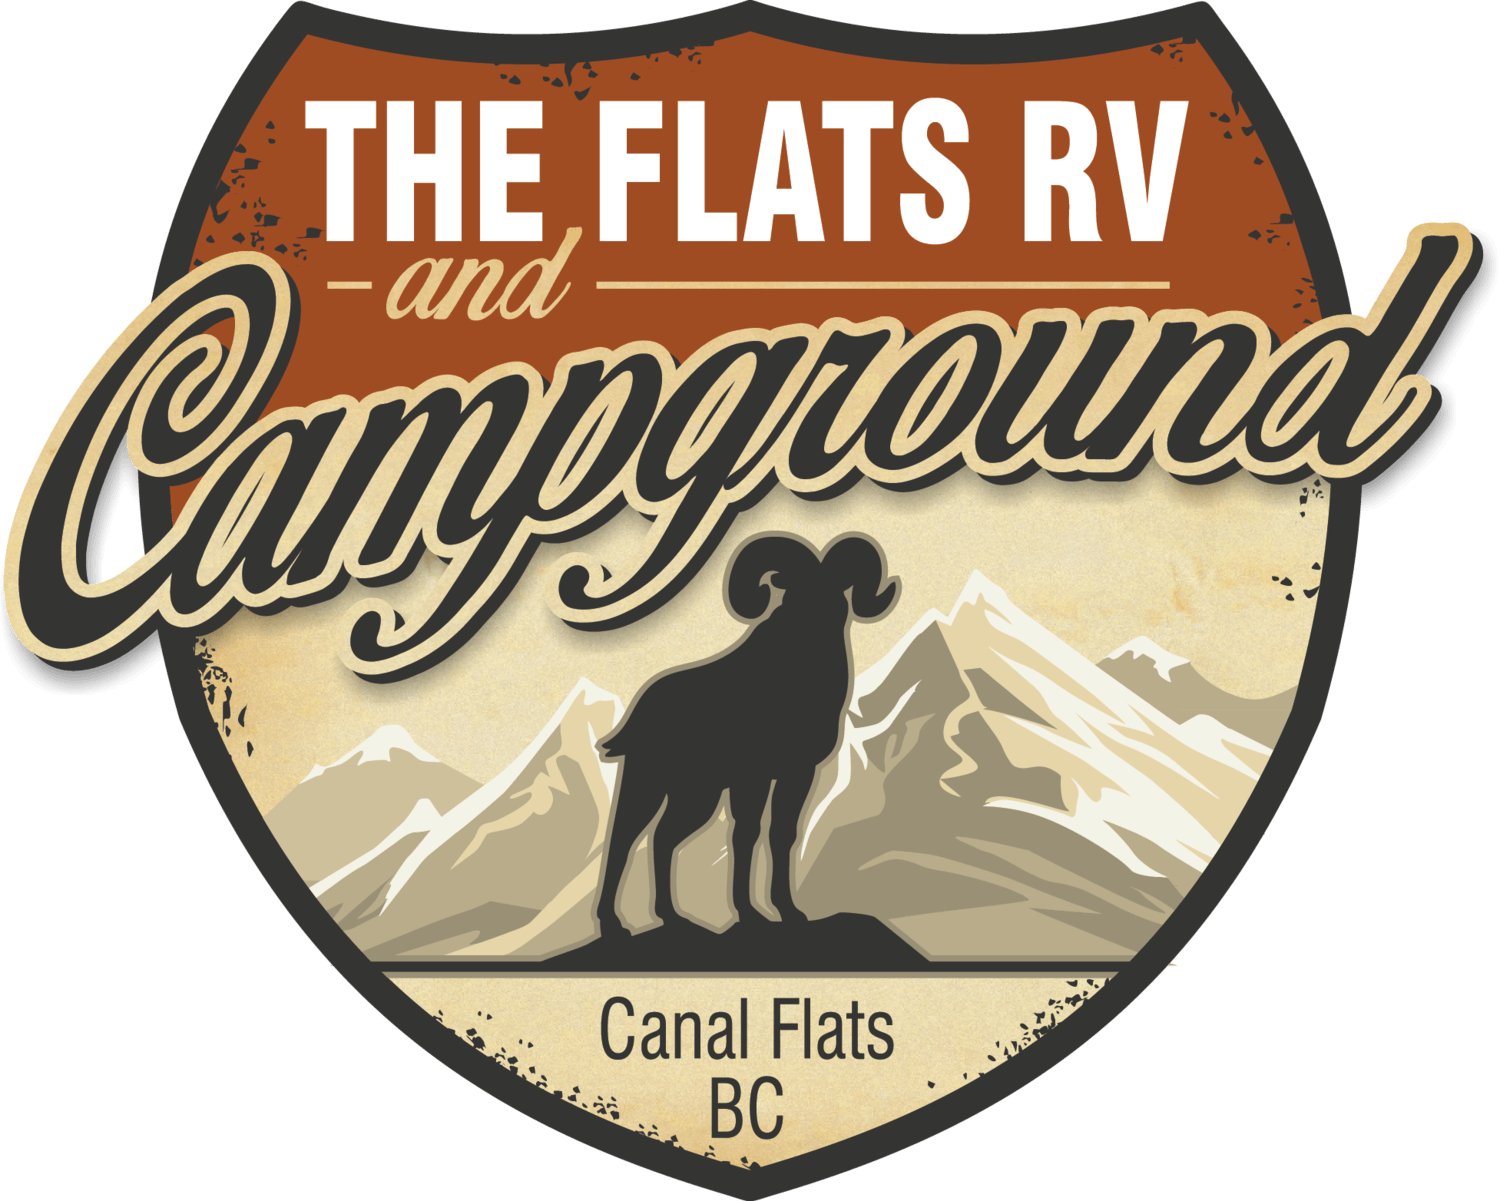 Campground Logo - The Flats RV and Campground